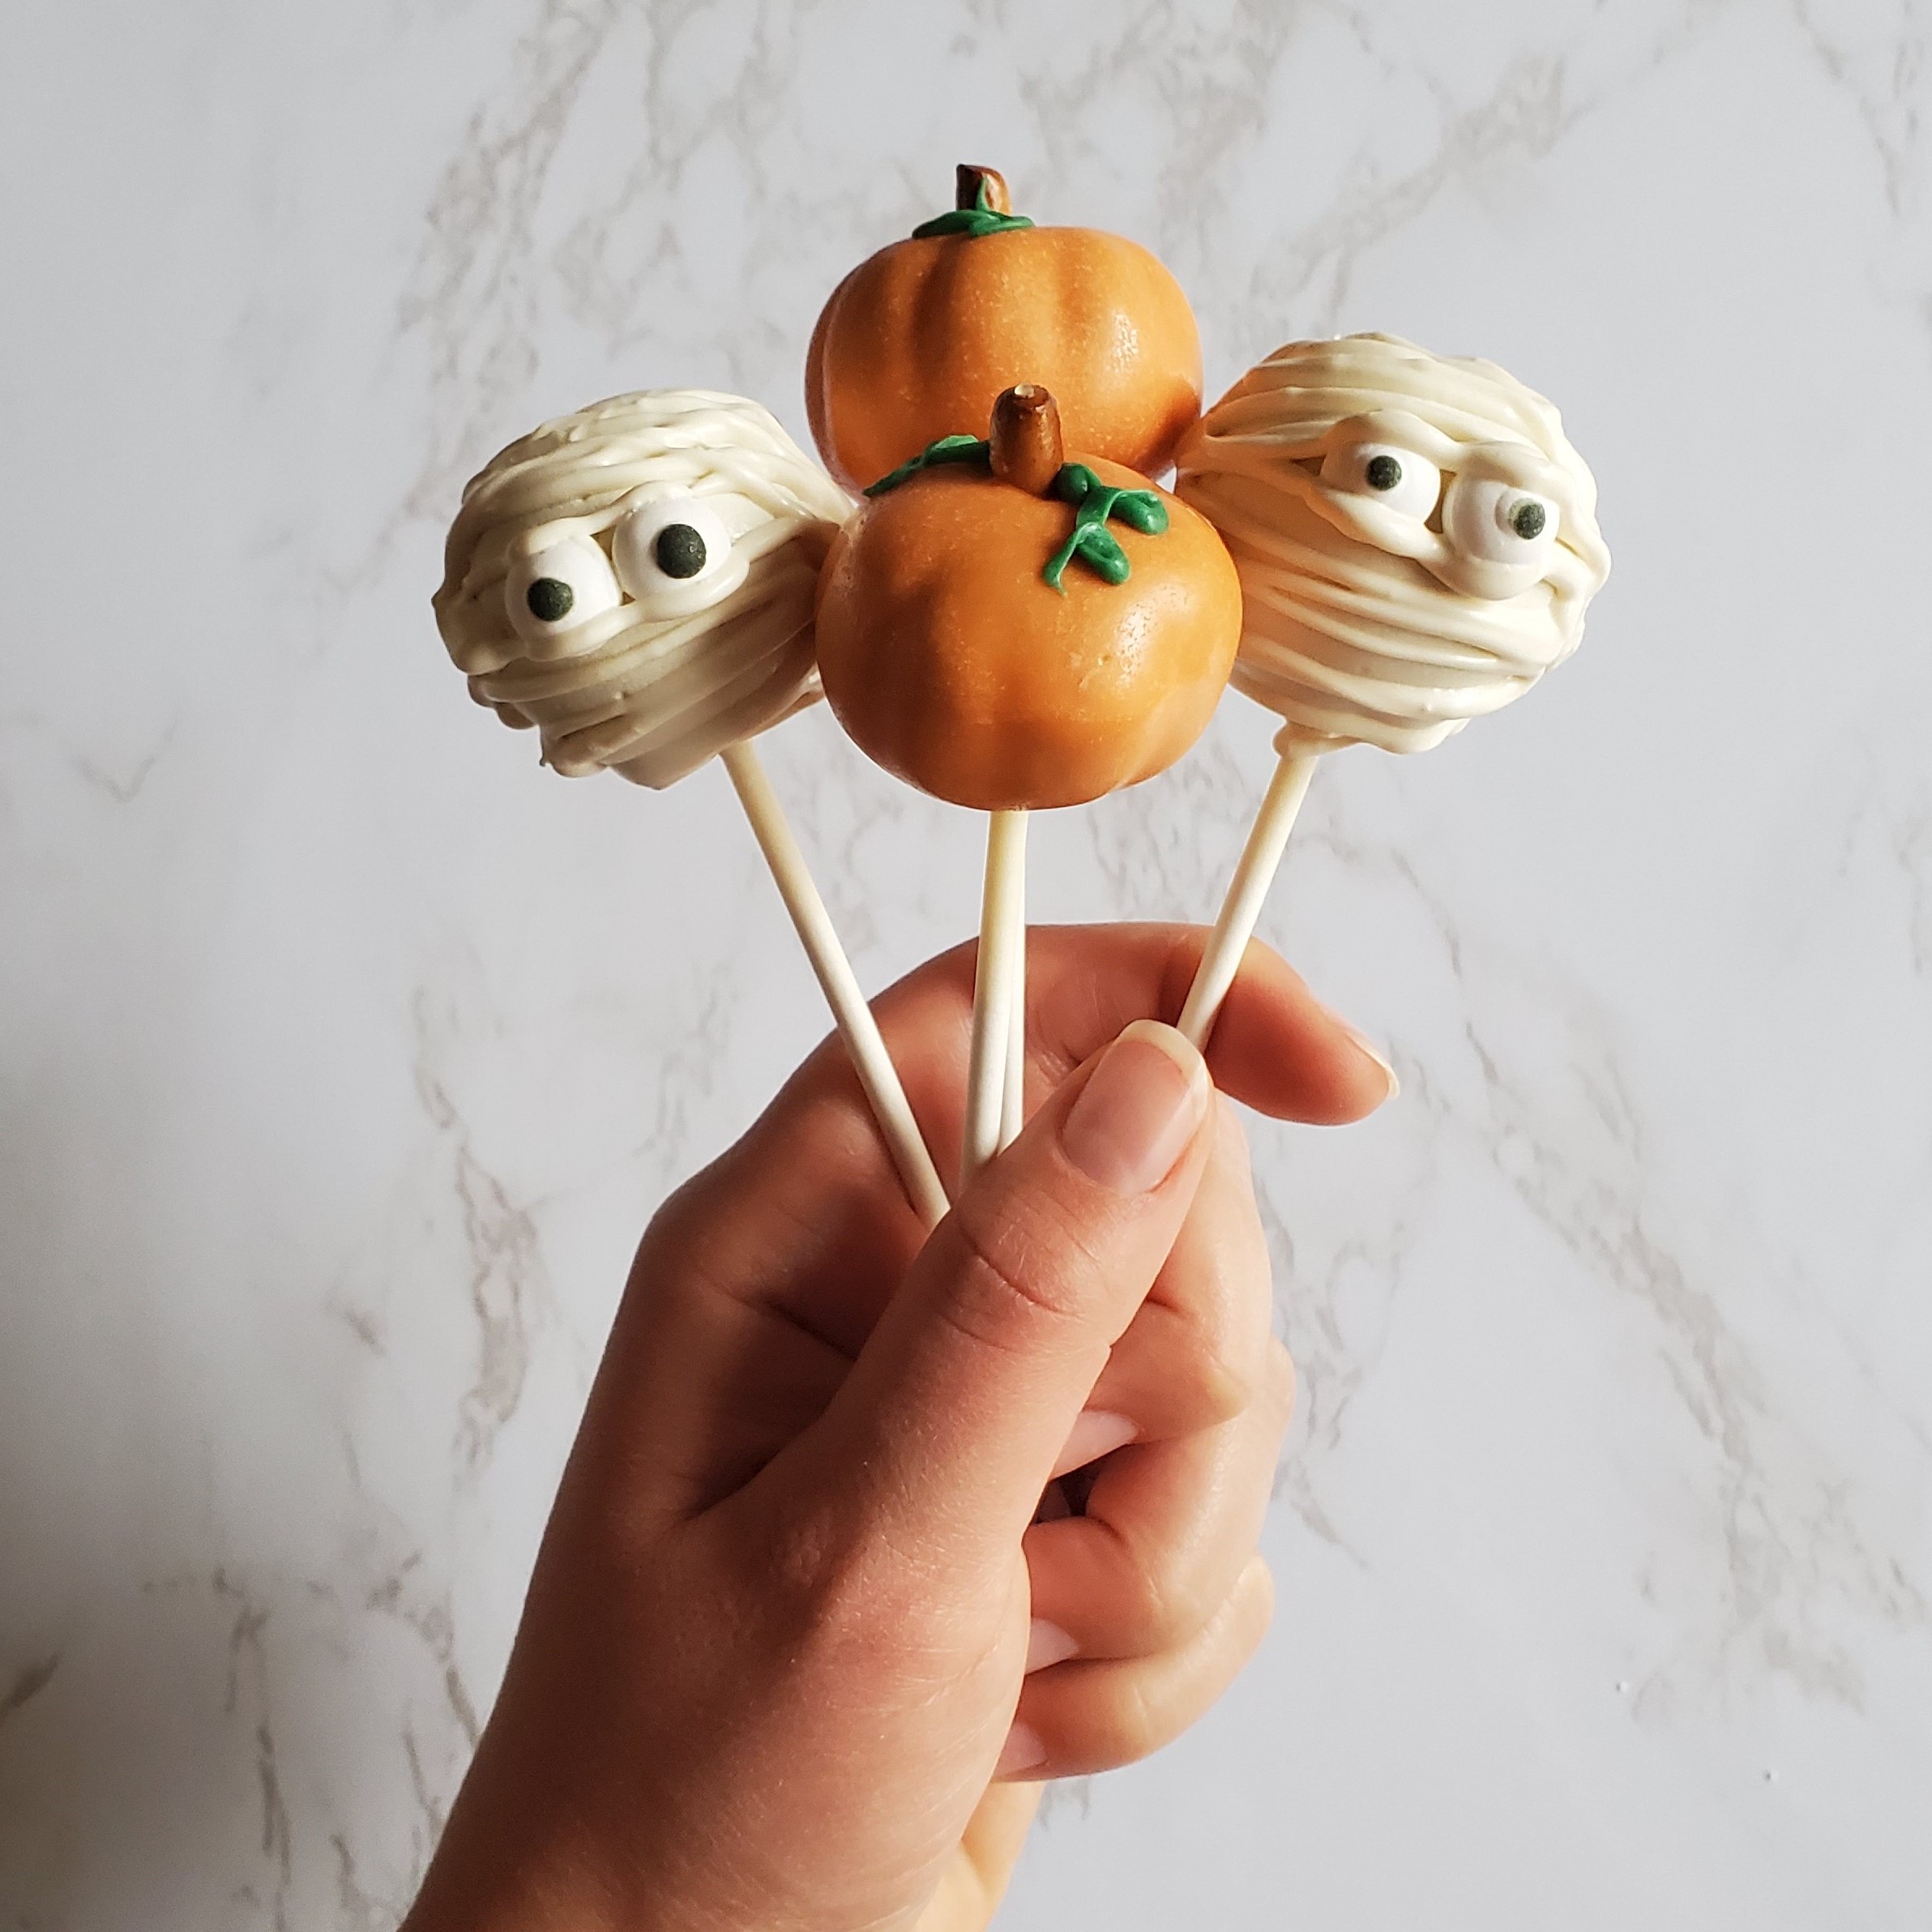 A hand up against a white marble background holds up four cake pops, two have been decorated like pumpkins and the other two have been decorated as mummies using chocolate.